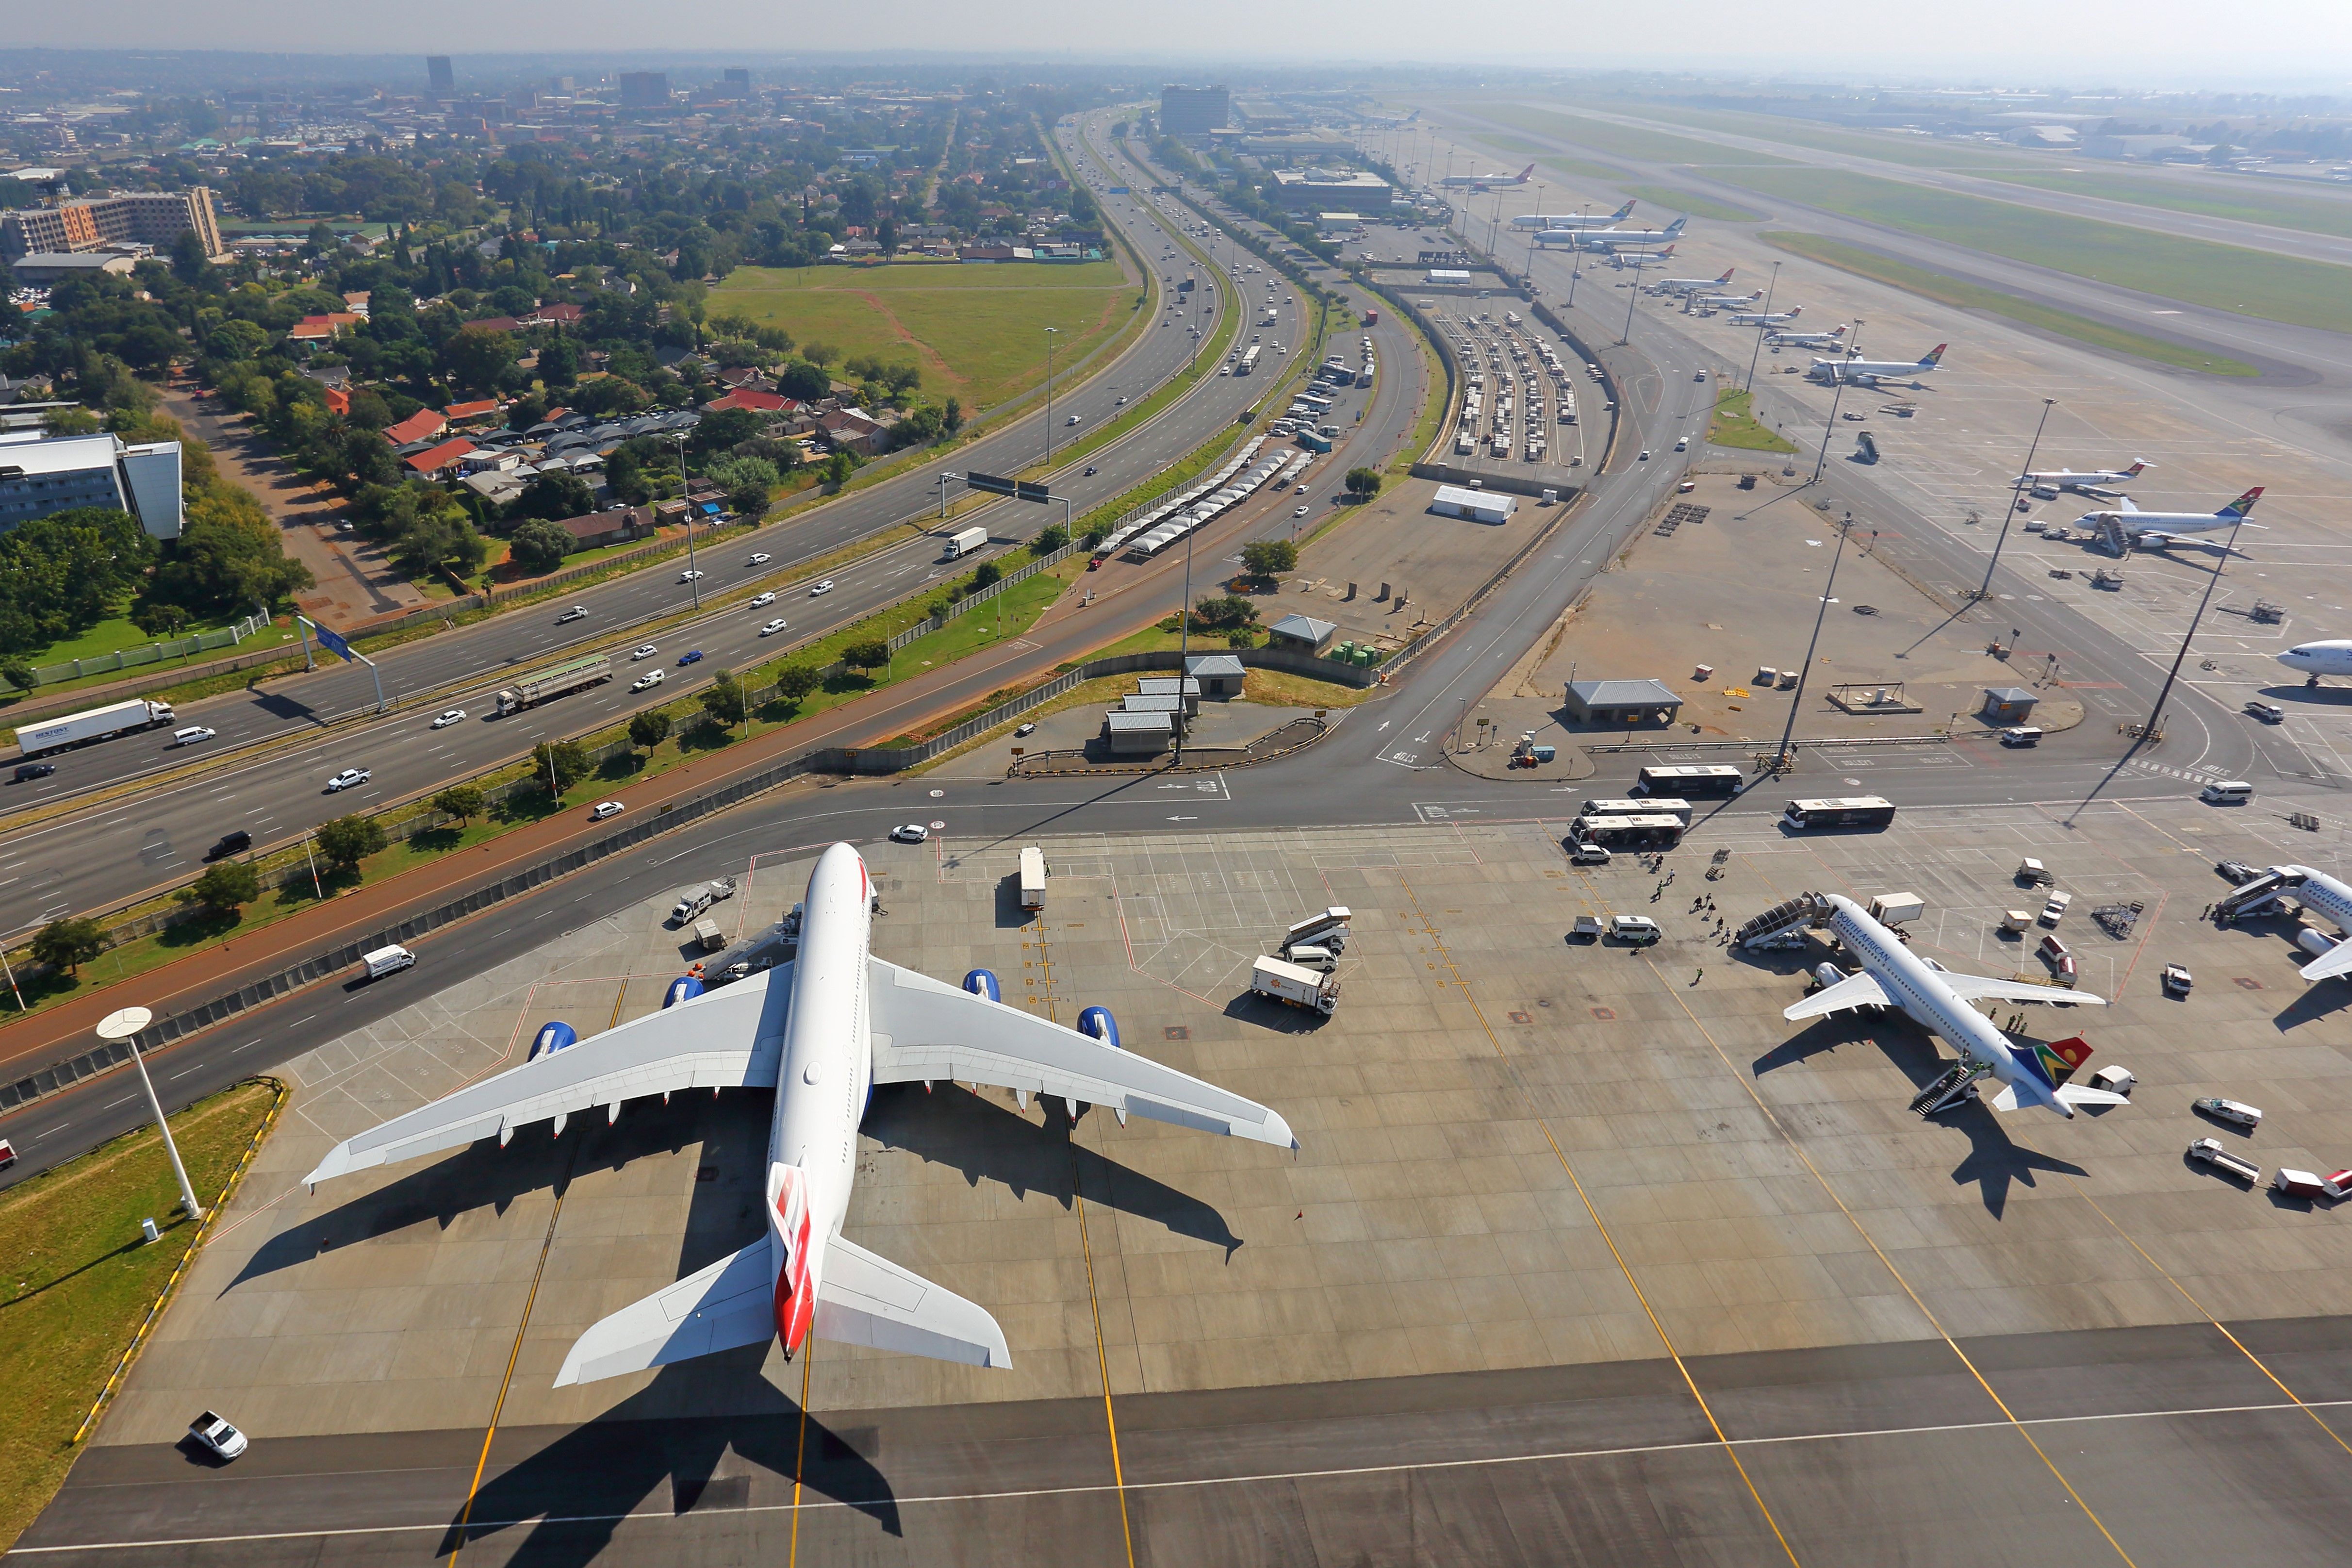 Airbus A380 parked at Johannesburg OR Tambo